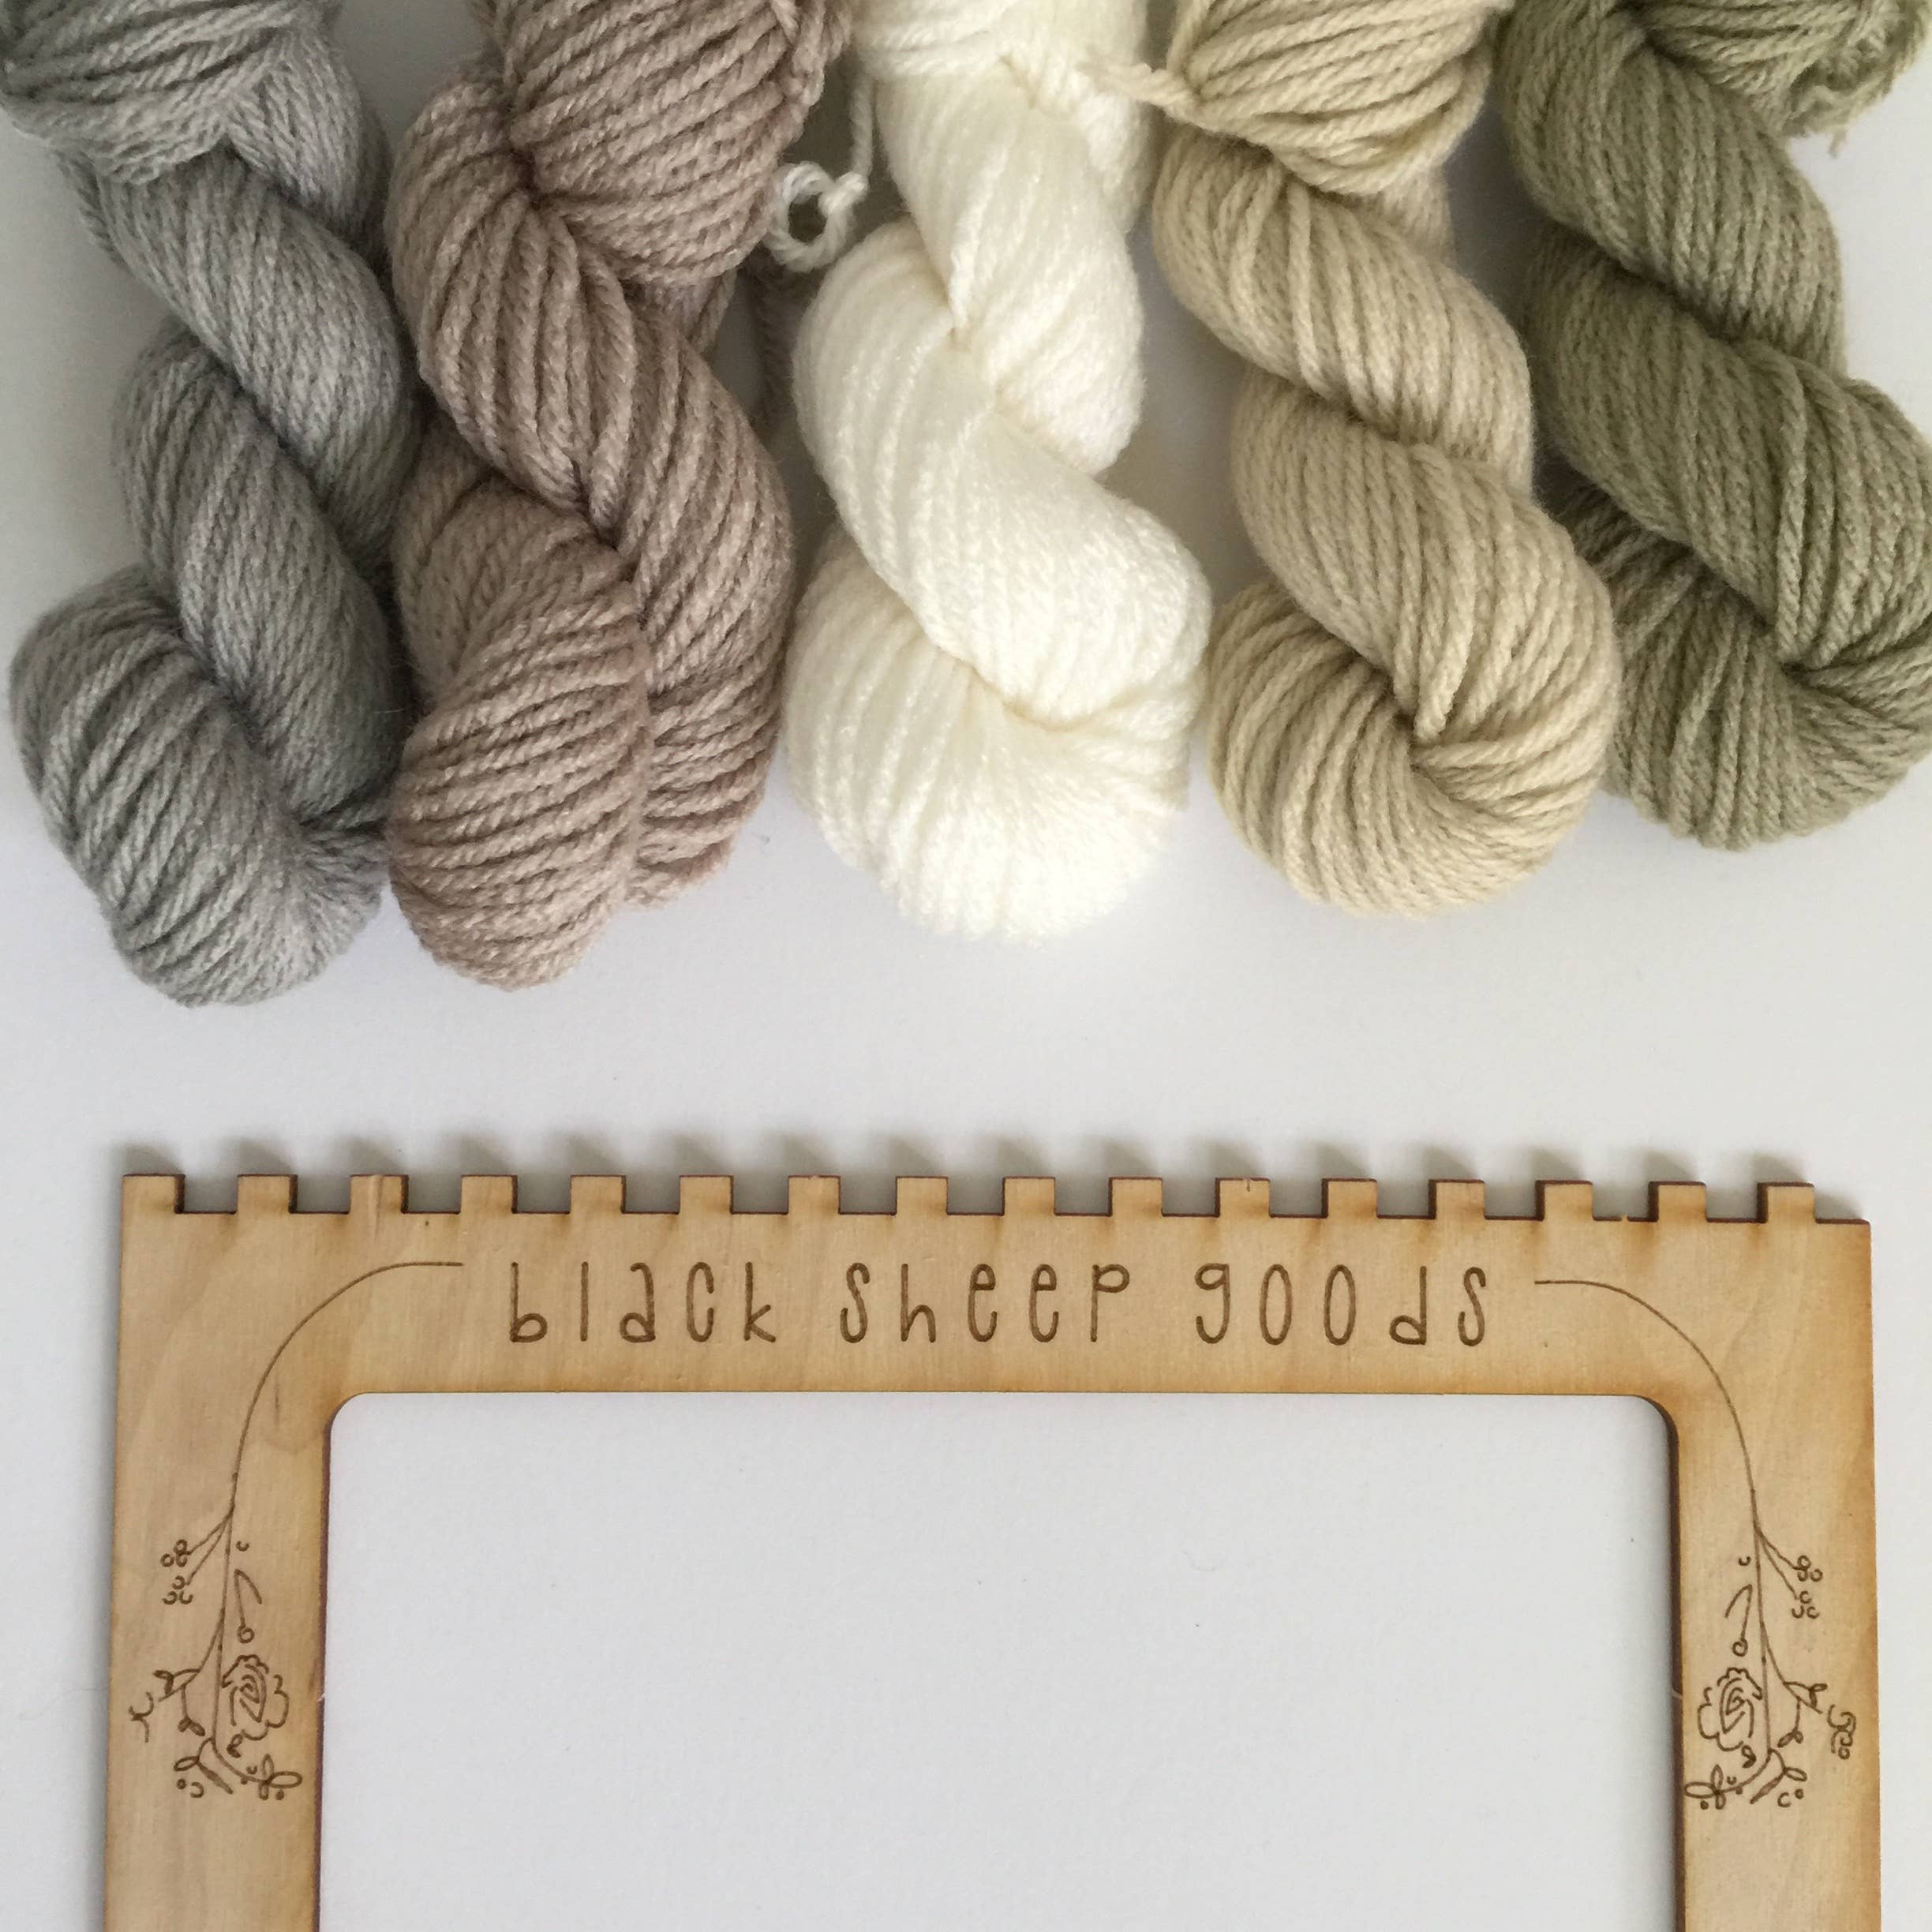 Tapestry Weaving Kit - Natural - by Black Sheep Goods